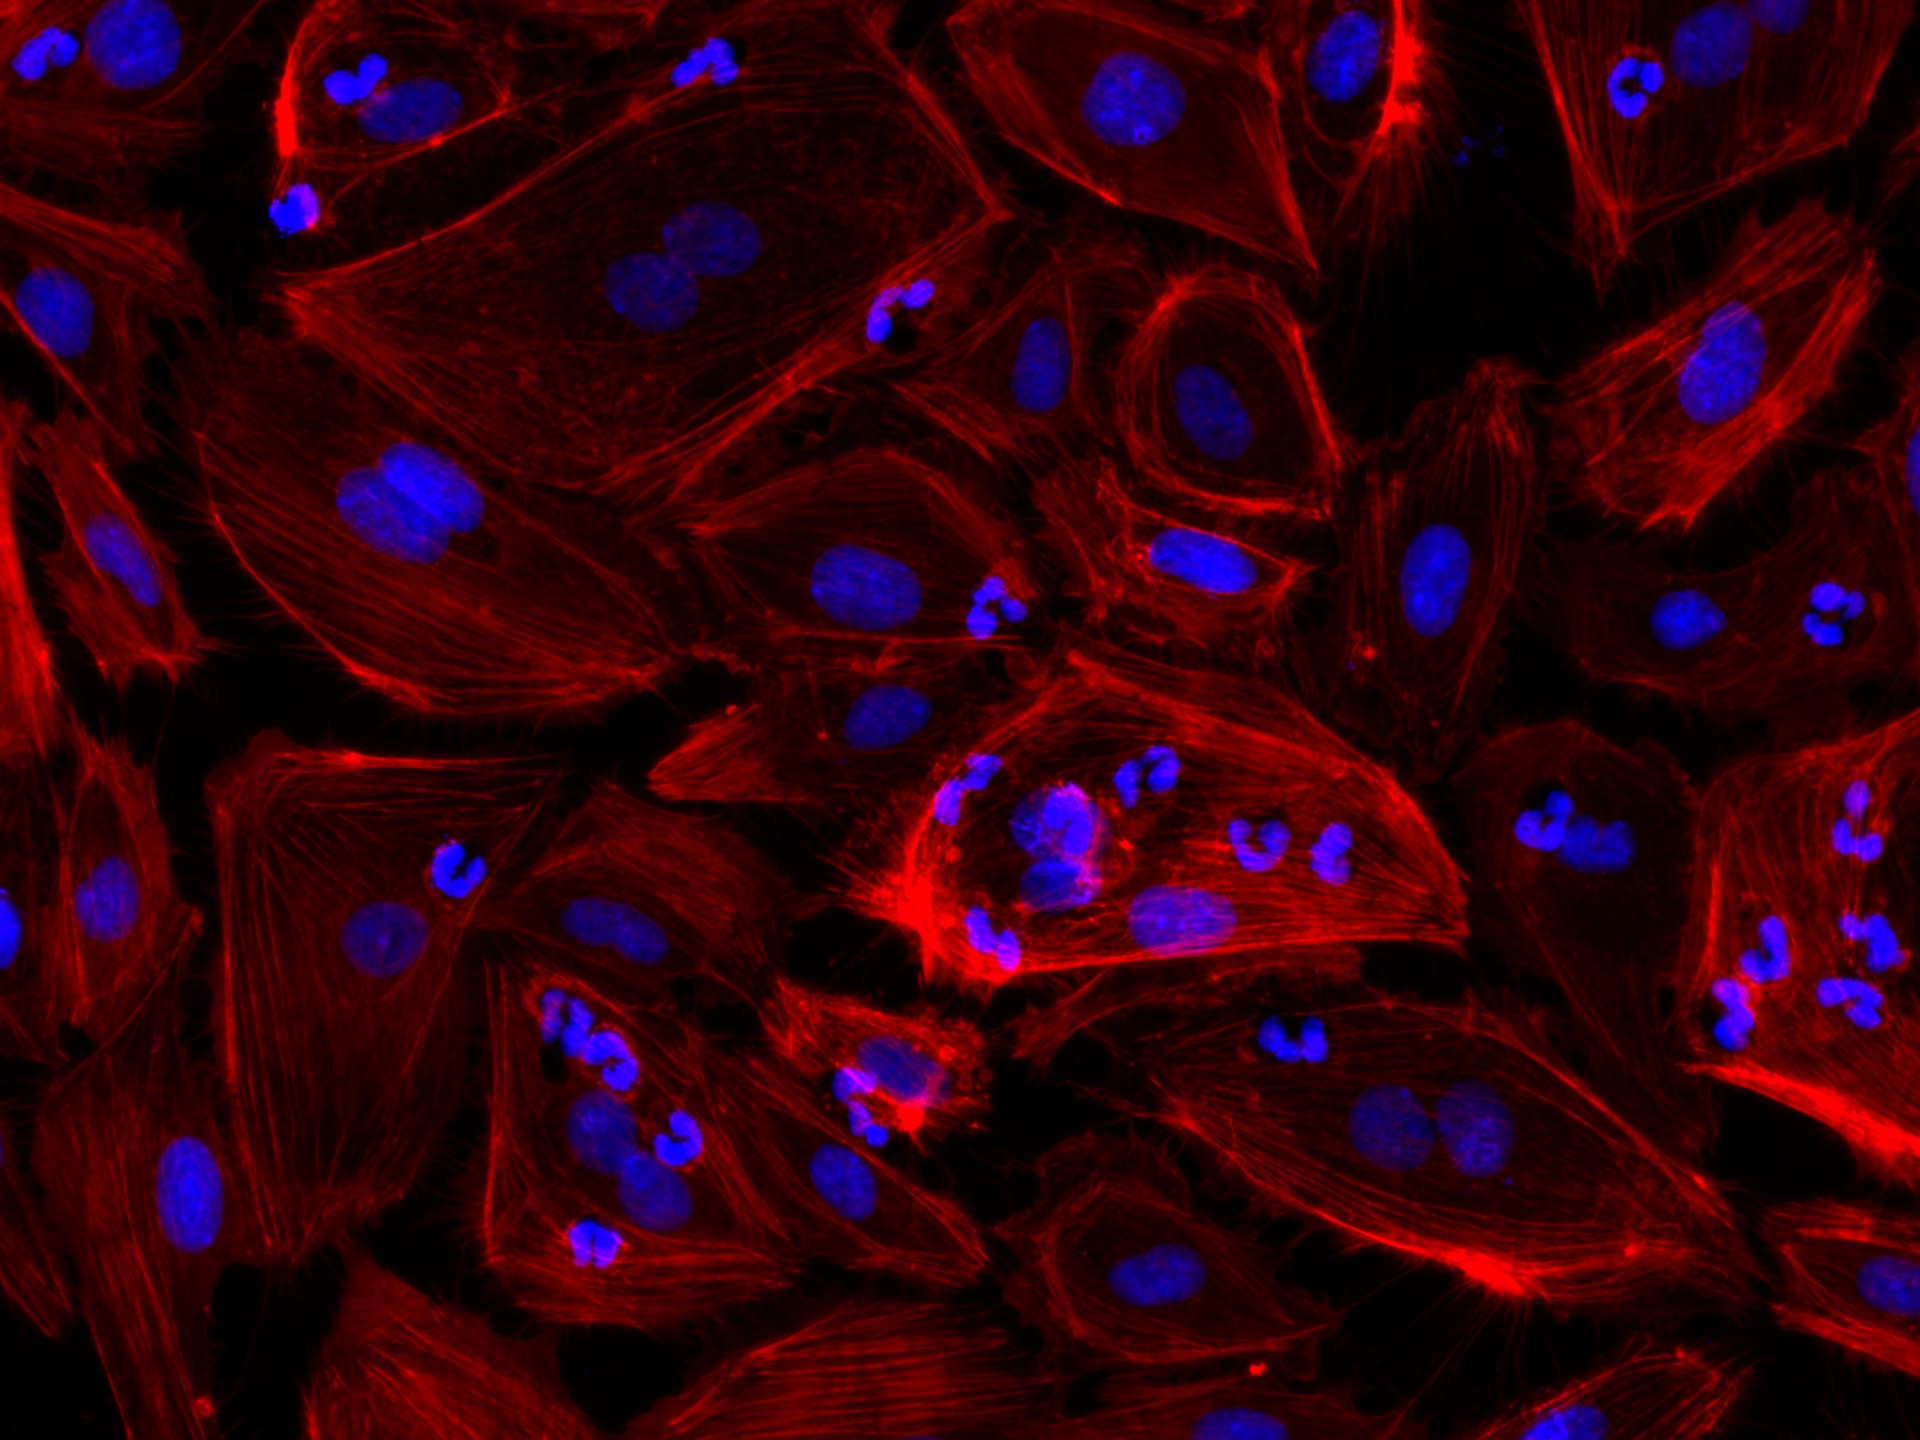 Stimulated endothelial cells treated with neutrophils